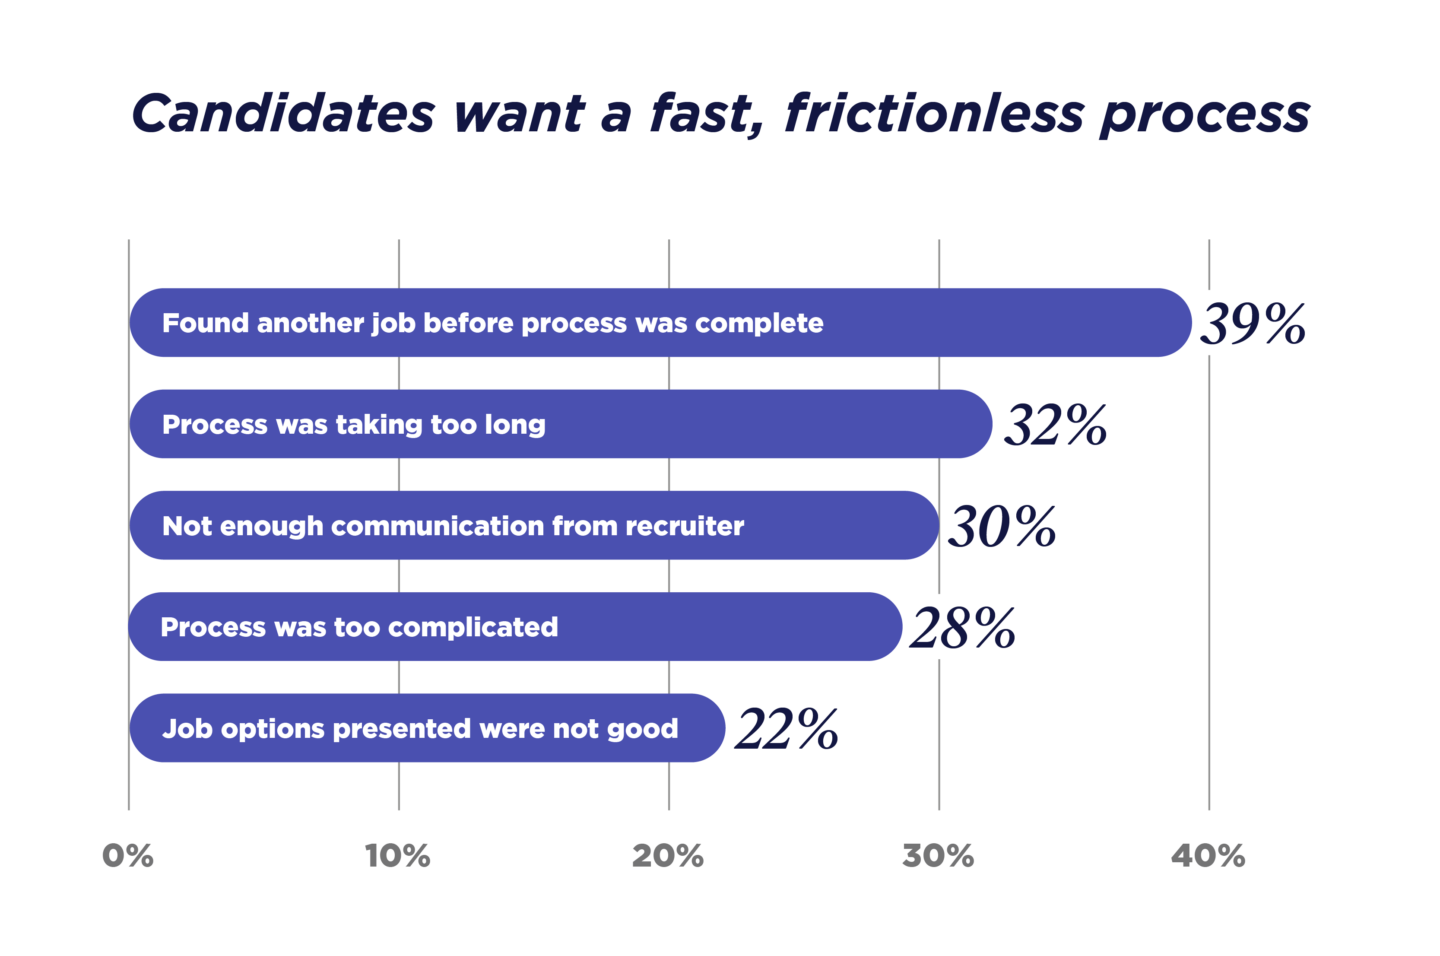 Candidates want a fast, frictionless process